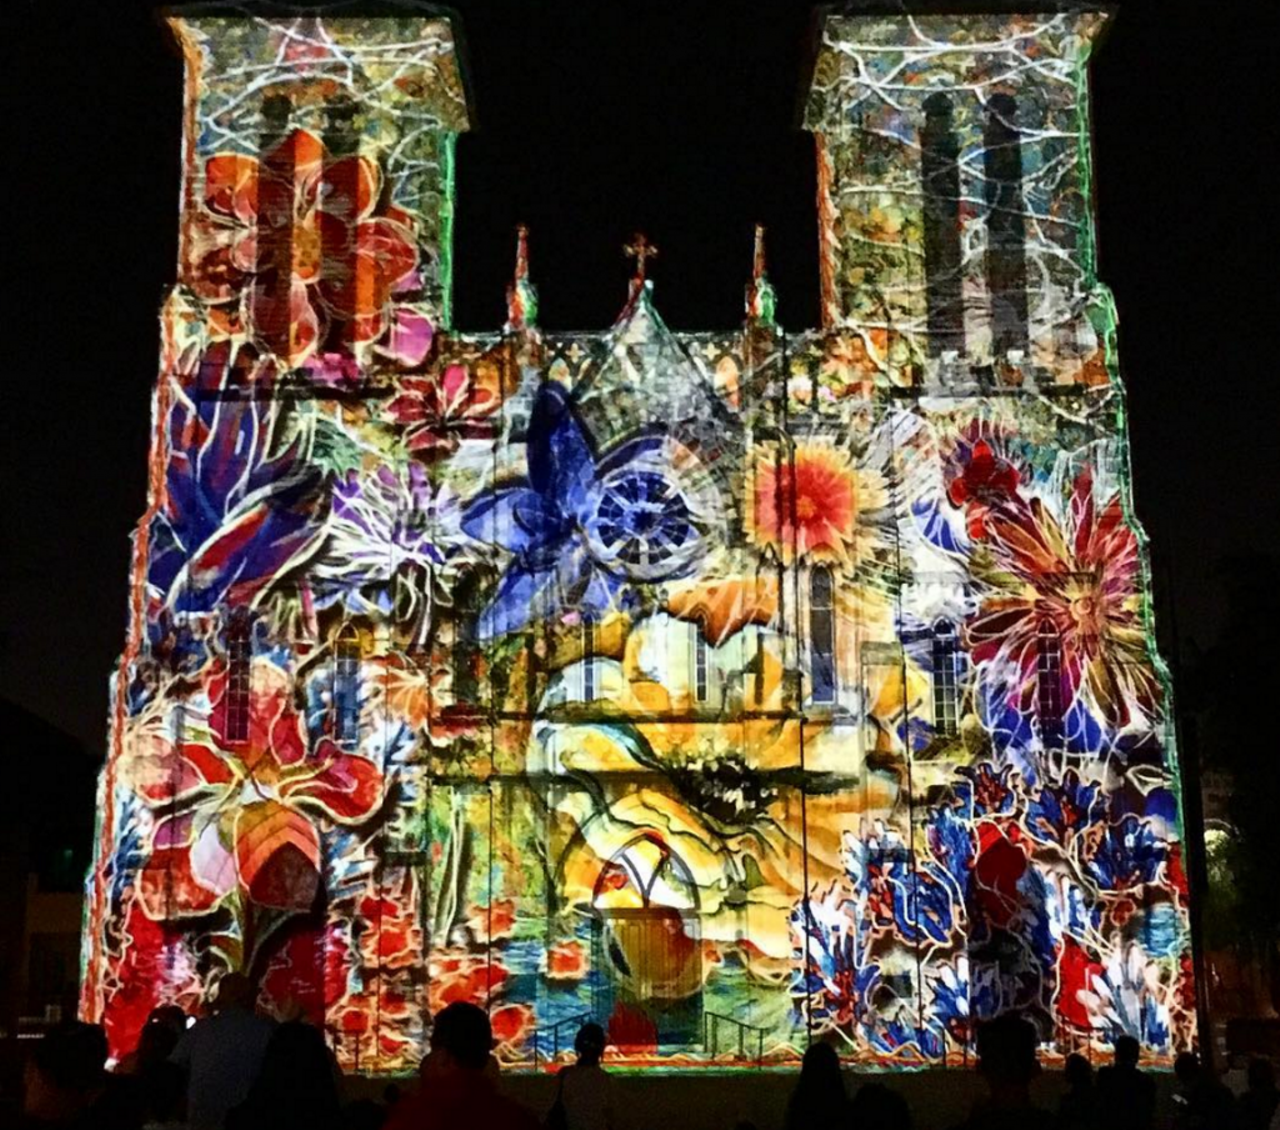 The Saga at San Fernando Cathedral
115 W. Main Plaza
Artist: Xavier de Richemont, 2014
You've probably seen it plastered all over your Instagram feed, but it's so worth seeing in real life. Four days a week at multiple times nightly, San Fernando Cathedral is lit up with a 24-minute laser light show that's truly spectacular.
Instagram/arapolla